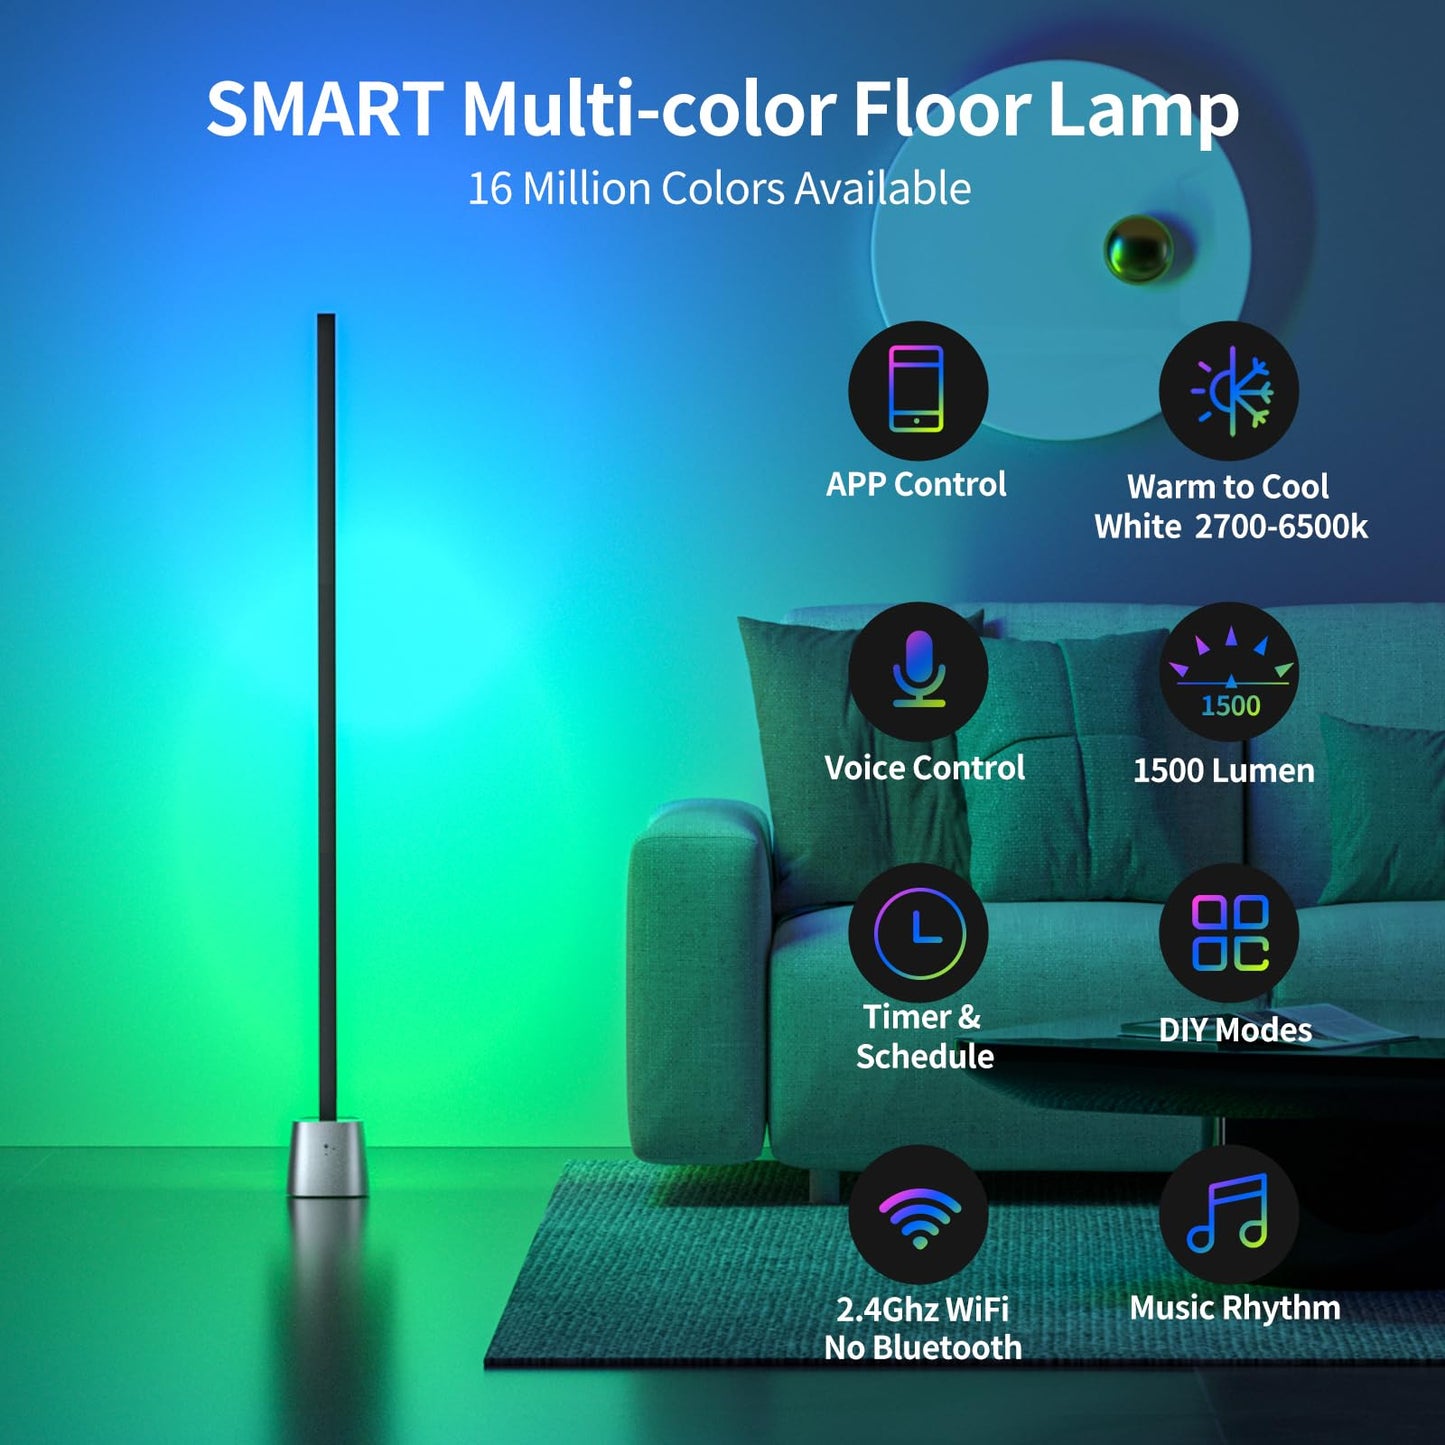 Fitop Smart LED Floor Lamp for Home: Dynamic 44 Modes, Customizable DIY Colors, Music Sync & Timer - Alexa/Google Assistant Compatible for Living Room, Bedroom, Gaming - Adjustable RGB & Cool White Light